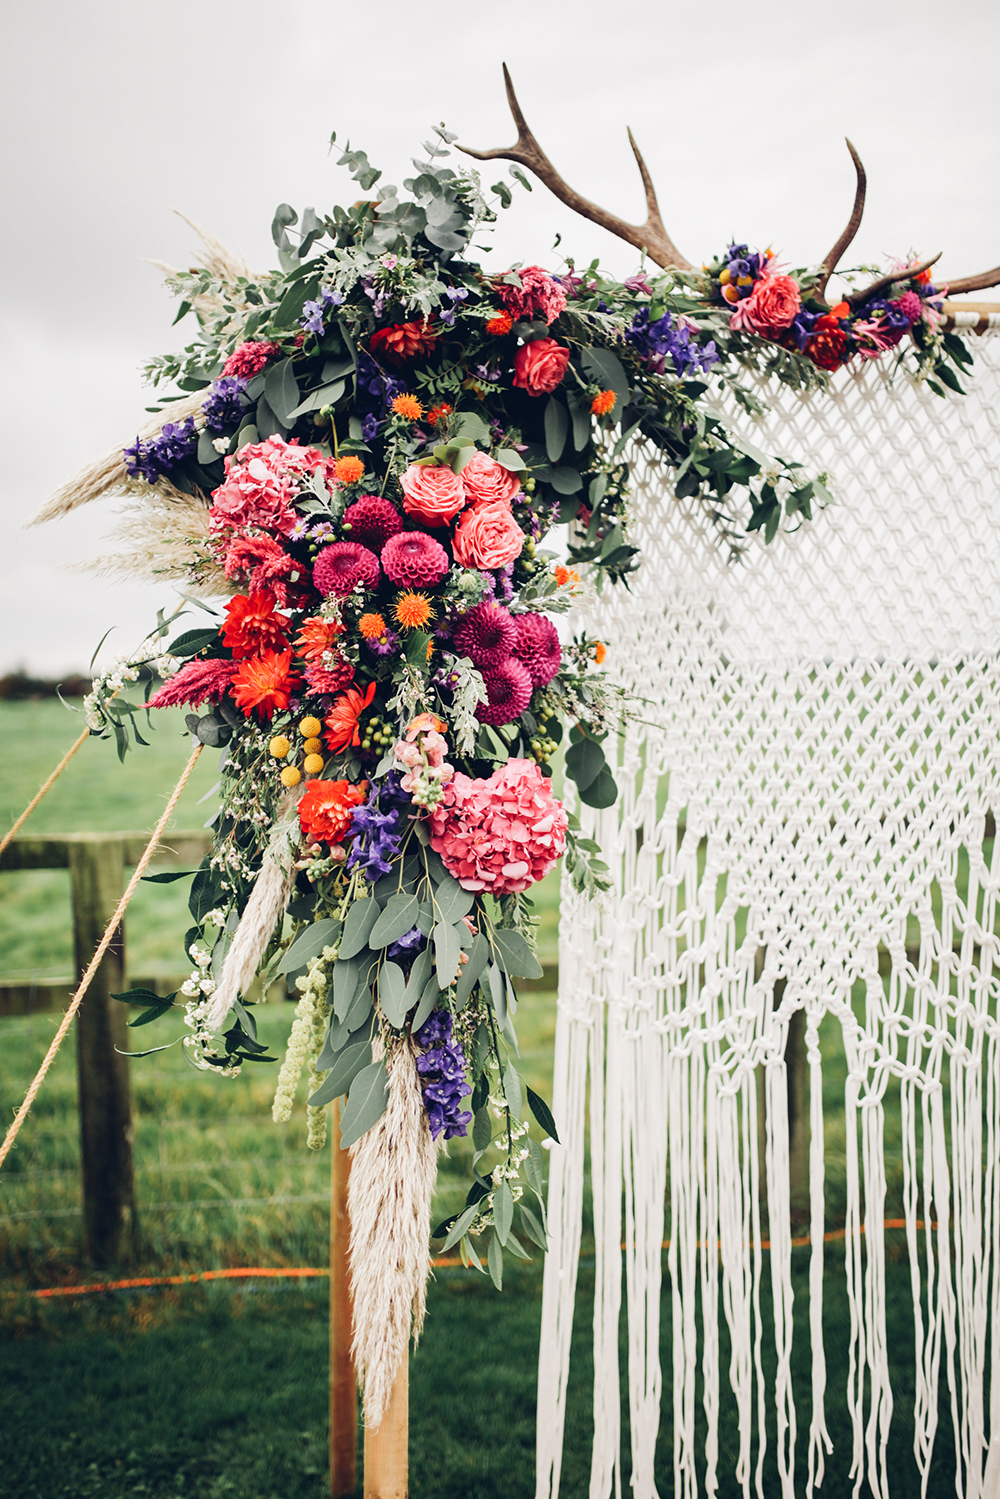 Bohemian Wedding ideas - These Boho Chic Weddings are gorgeous and the perfect inspiration to design the perfect wedding day. More at the36thavenue.com